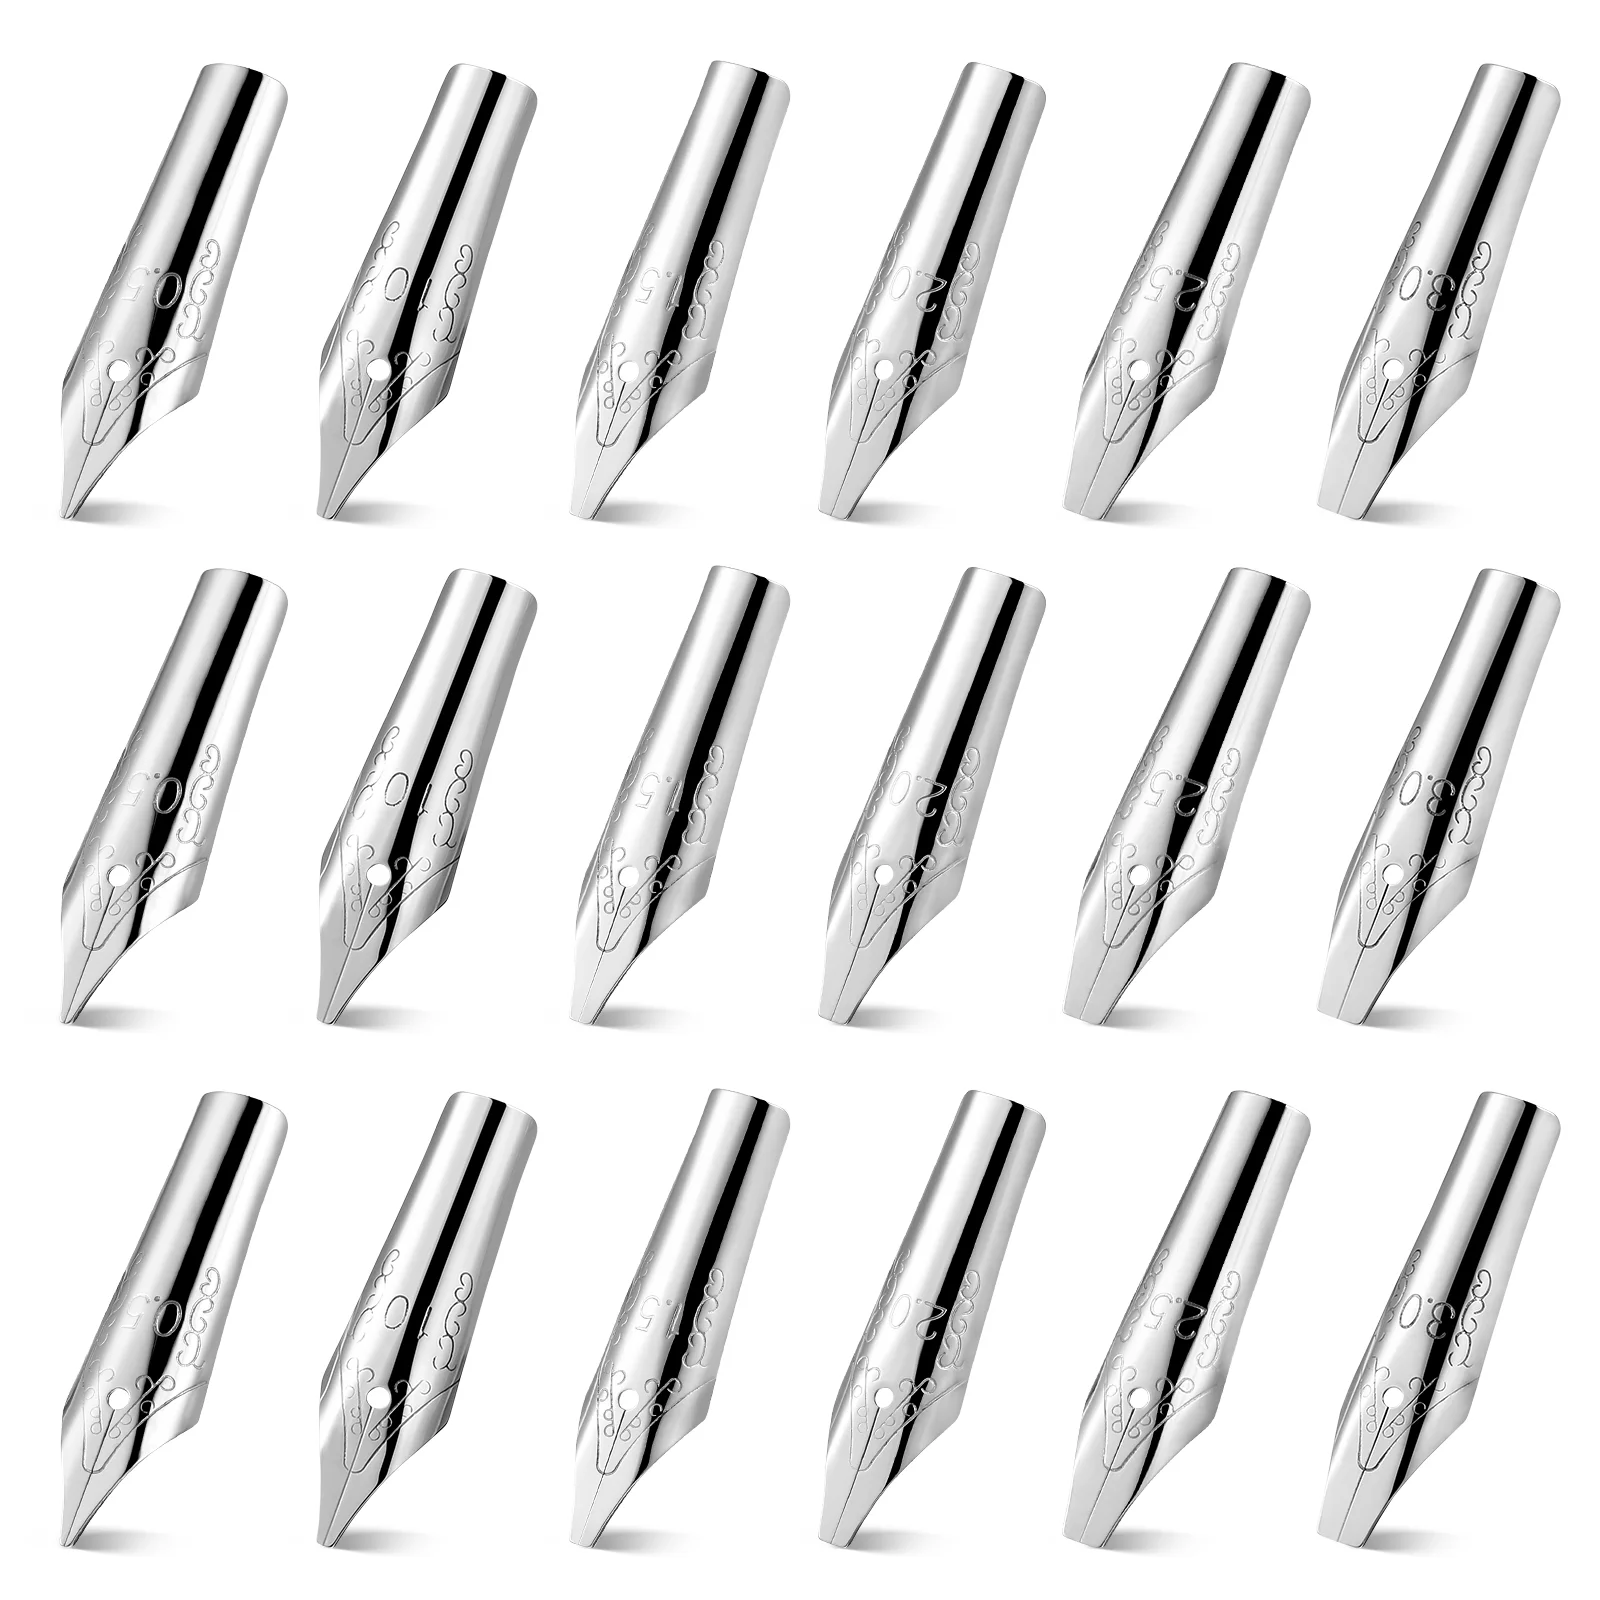 

30 Pcs Writing Professional Calligraphy Practice Practical Drawing Fountain Pen Nibs Pen Nibs Replacement Nibs for Pen